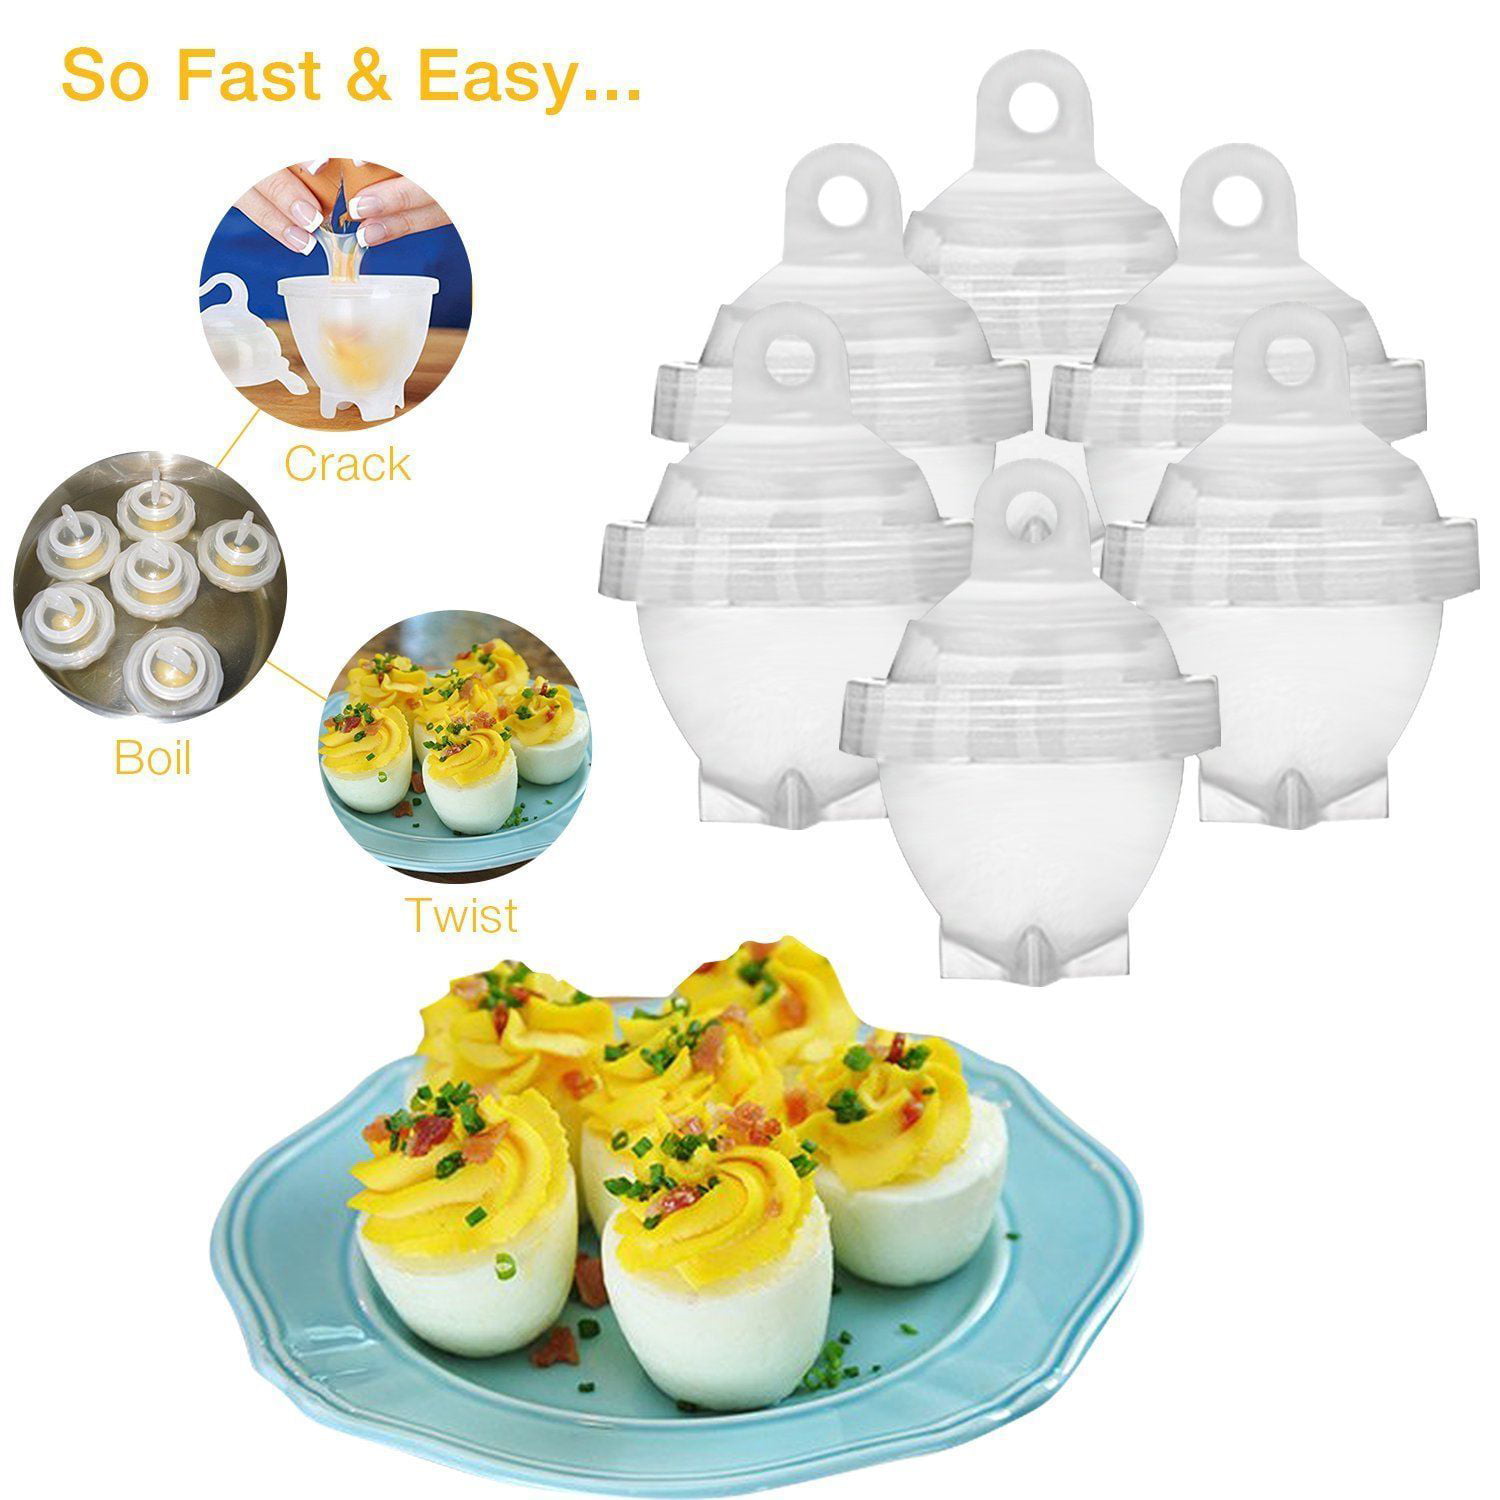 Do You Need a $20 Hard-Boiled Egg Maker? - You Can Do This! 